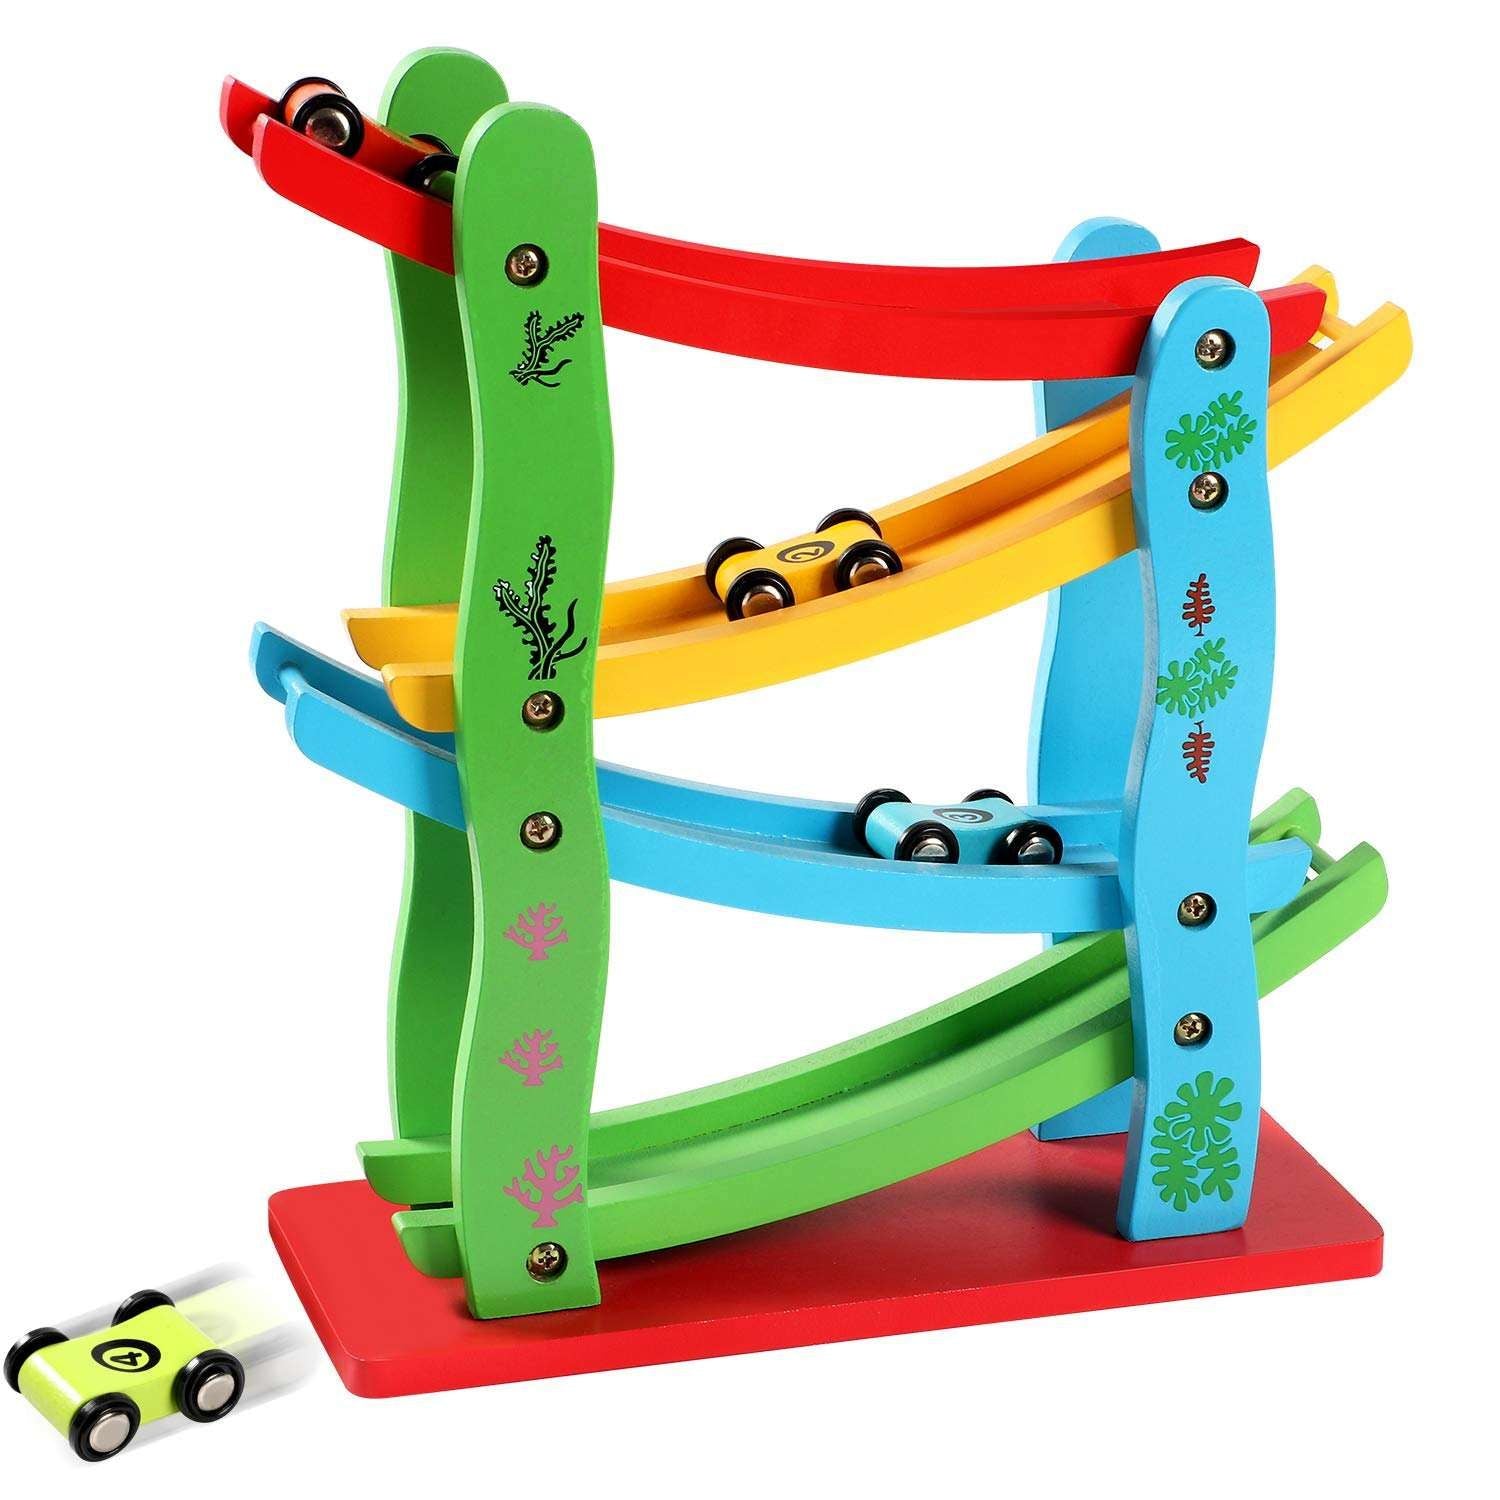 1pc Wooden Ramp Racer Toddler Toys Race Track Car Games for Kids Boys Girls Gifts with 4 Small Racers